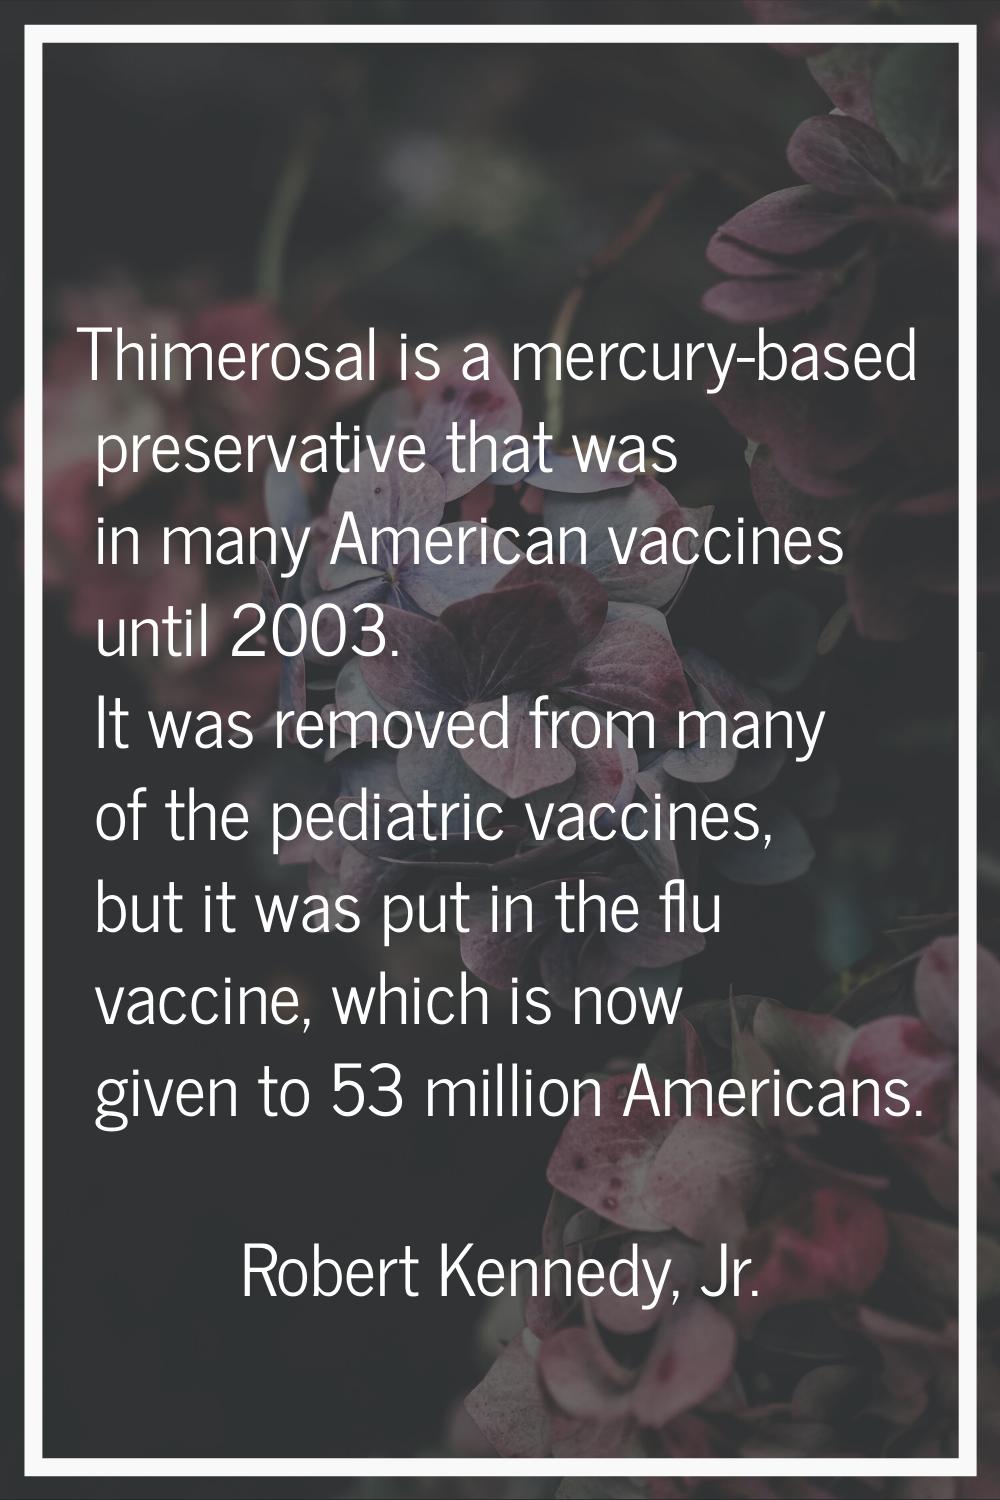 Thimerosal is a mercury-based preservative that was in many American vaccines until 2003. It was re